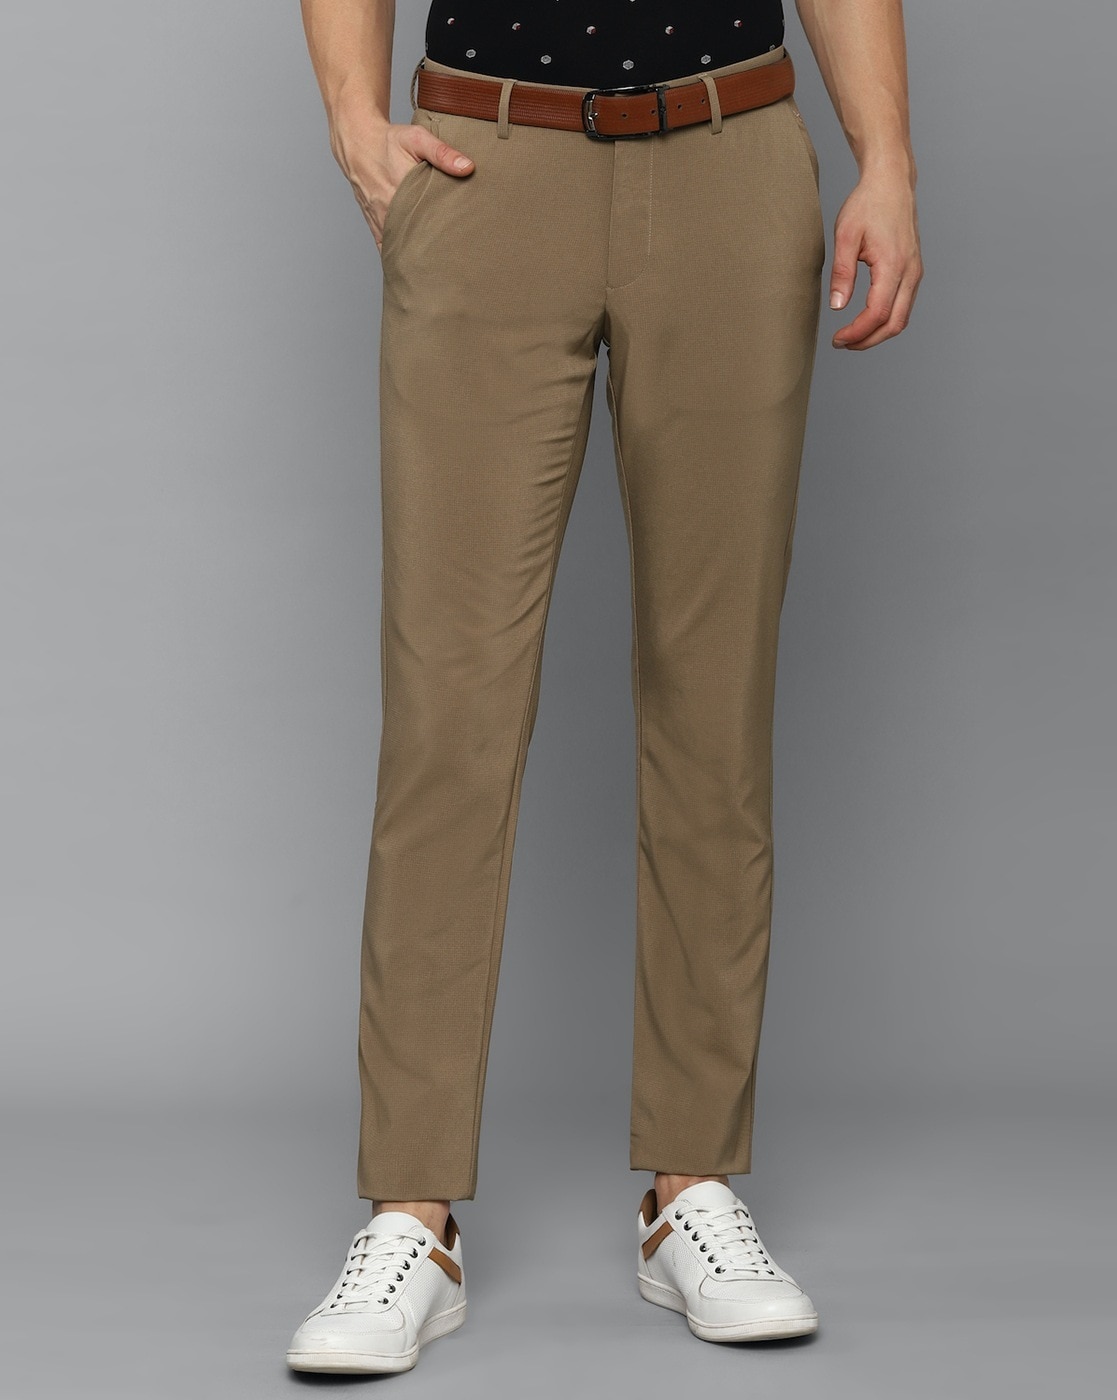 Allen Solly Woman Mid-Rise Cropped Trousers Price in India, Full  Specifications & Offers | DTashion.com